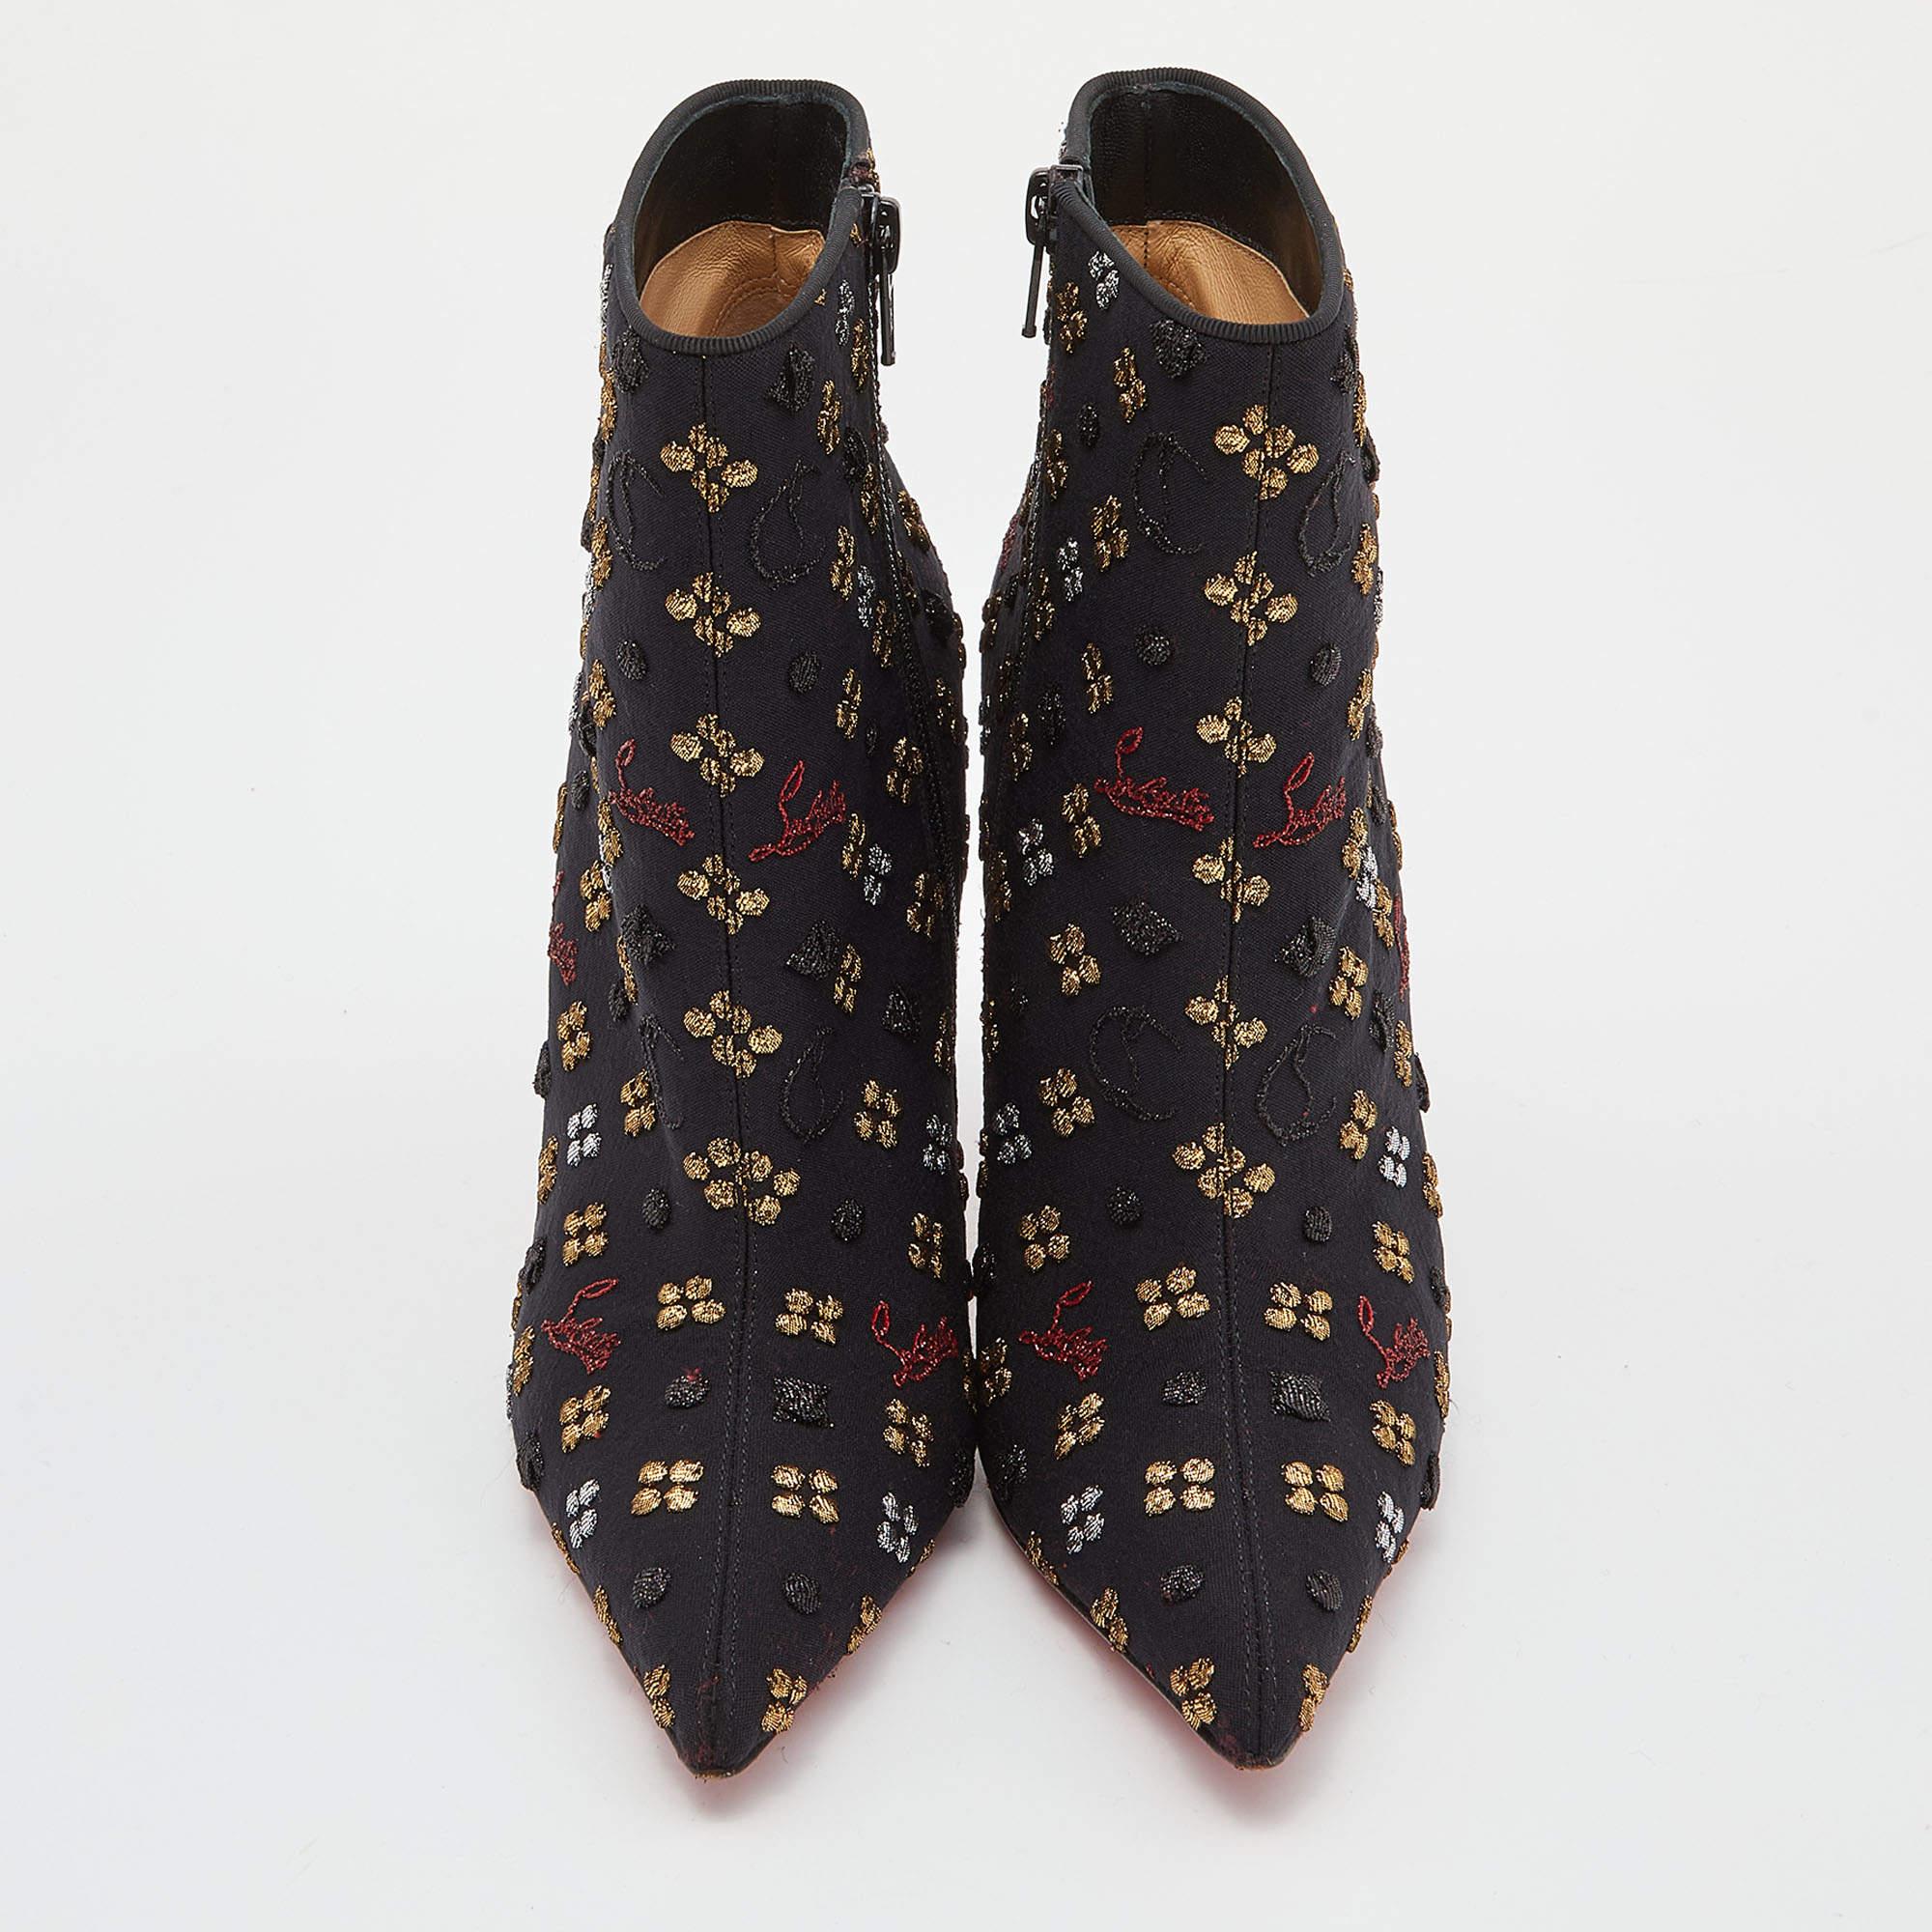 Let your latest shoe addition be this fabulous pair of ankle booties from Christian Louboutin. The black booties are crafted from embroidered fabric and feature pointed toes, 10.5 cm heels, and zipper closure.

Includes: Original Dustbag

